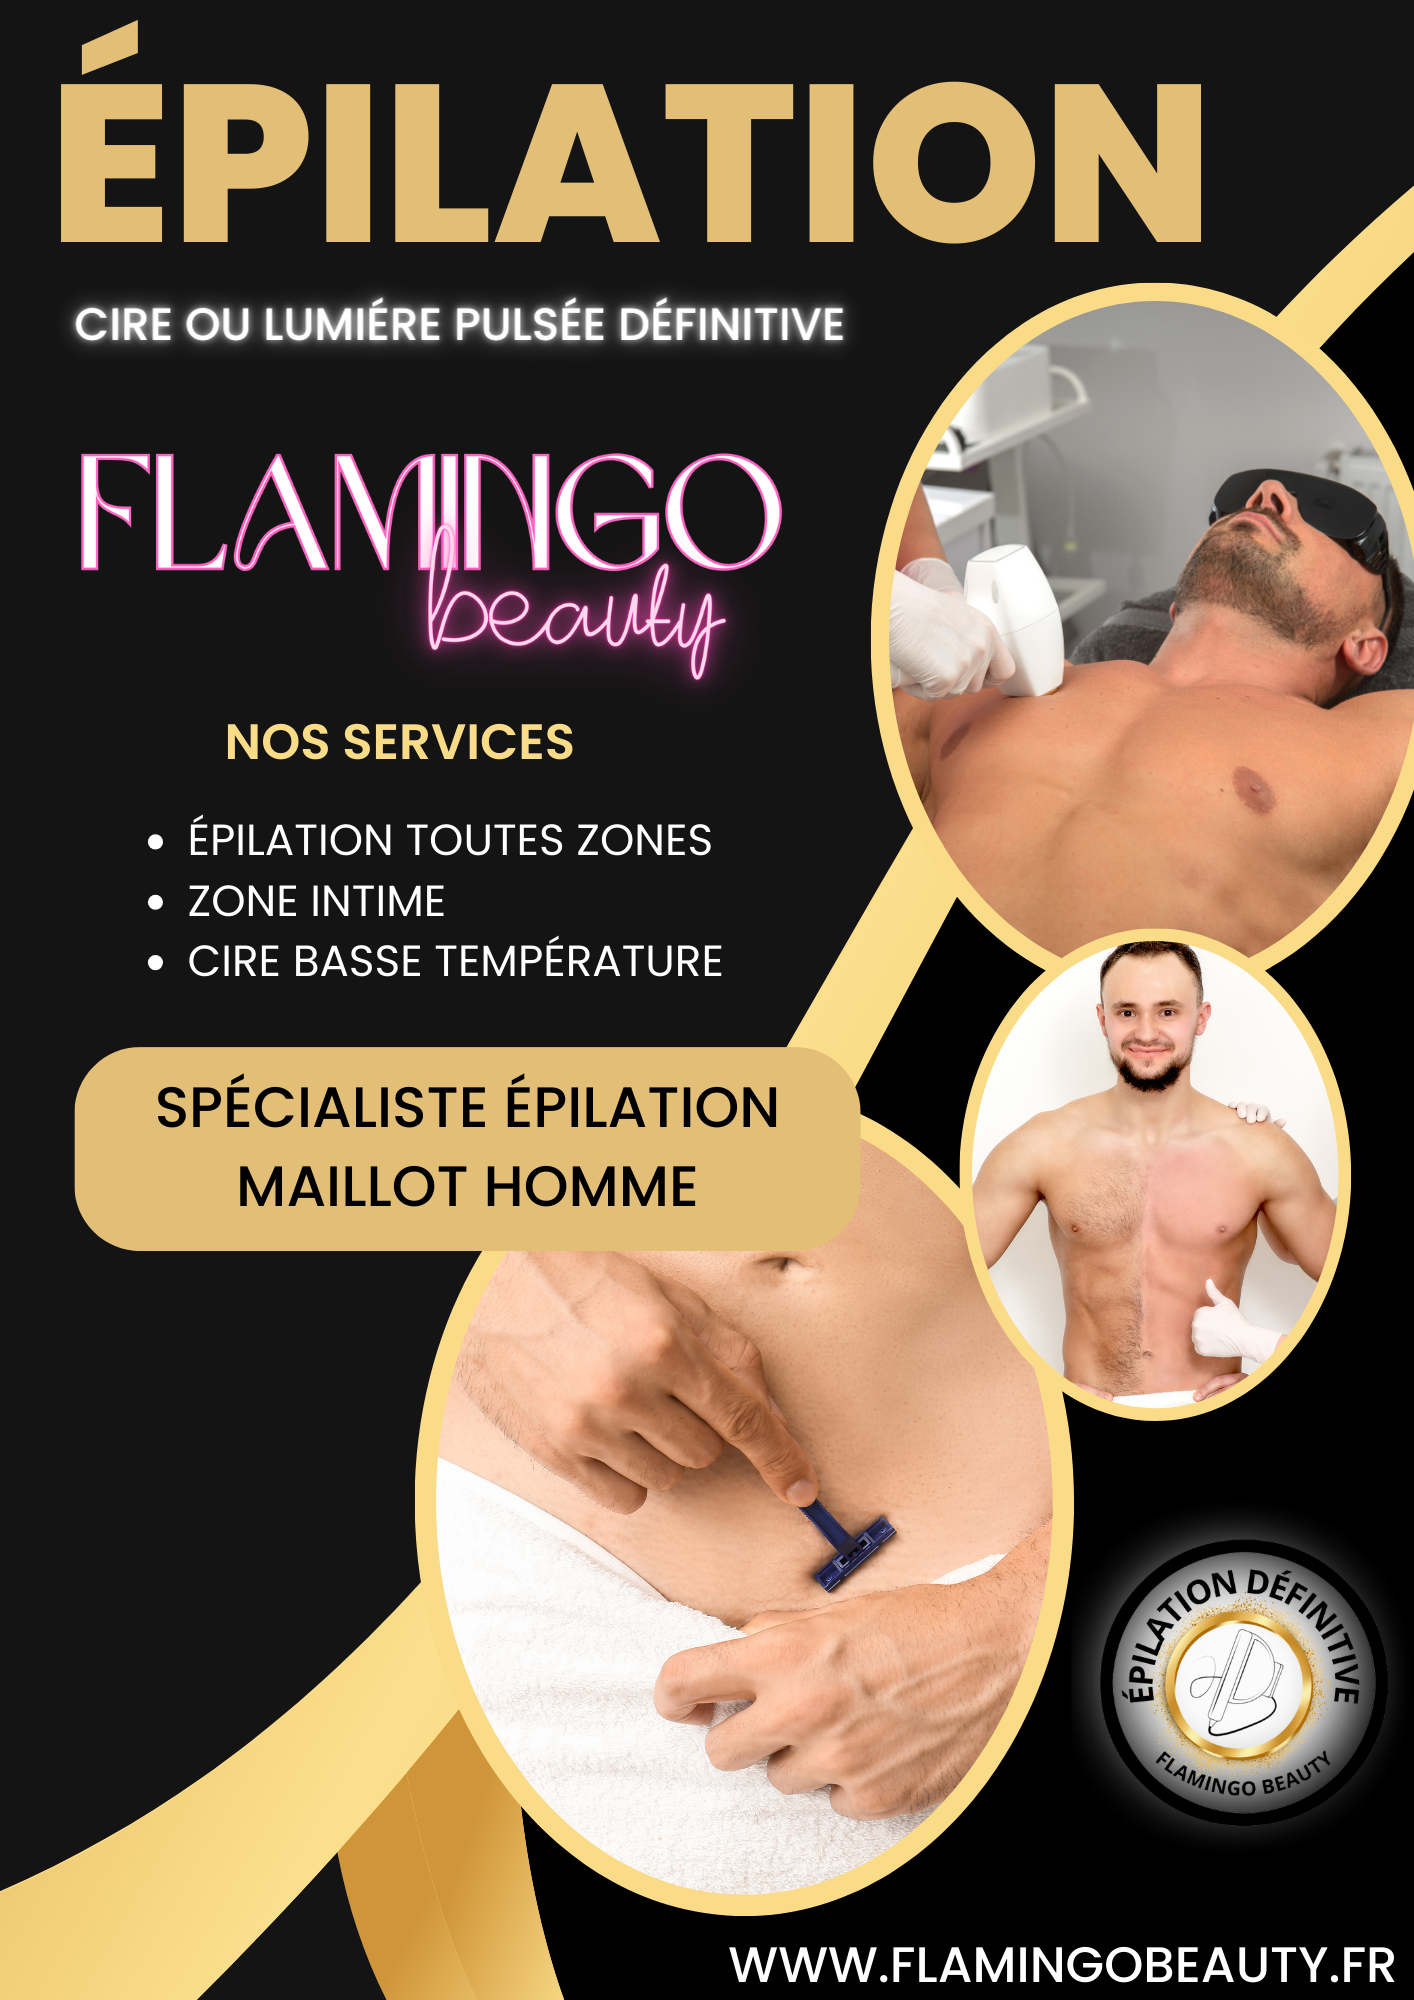 Epilation maillot homme A NICE